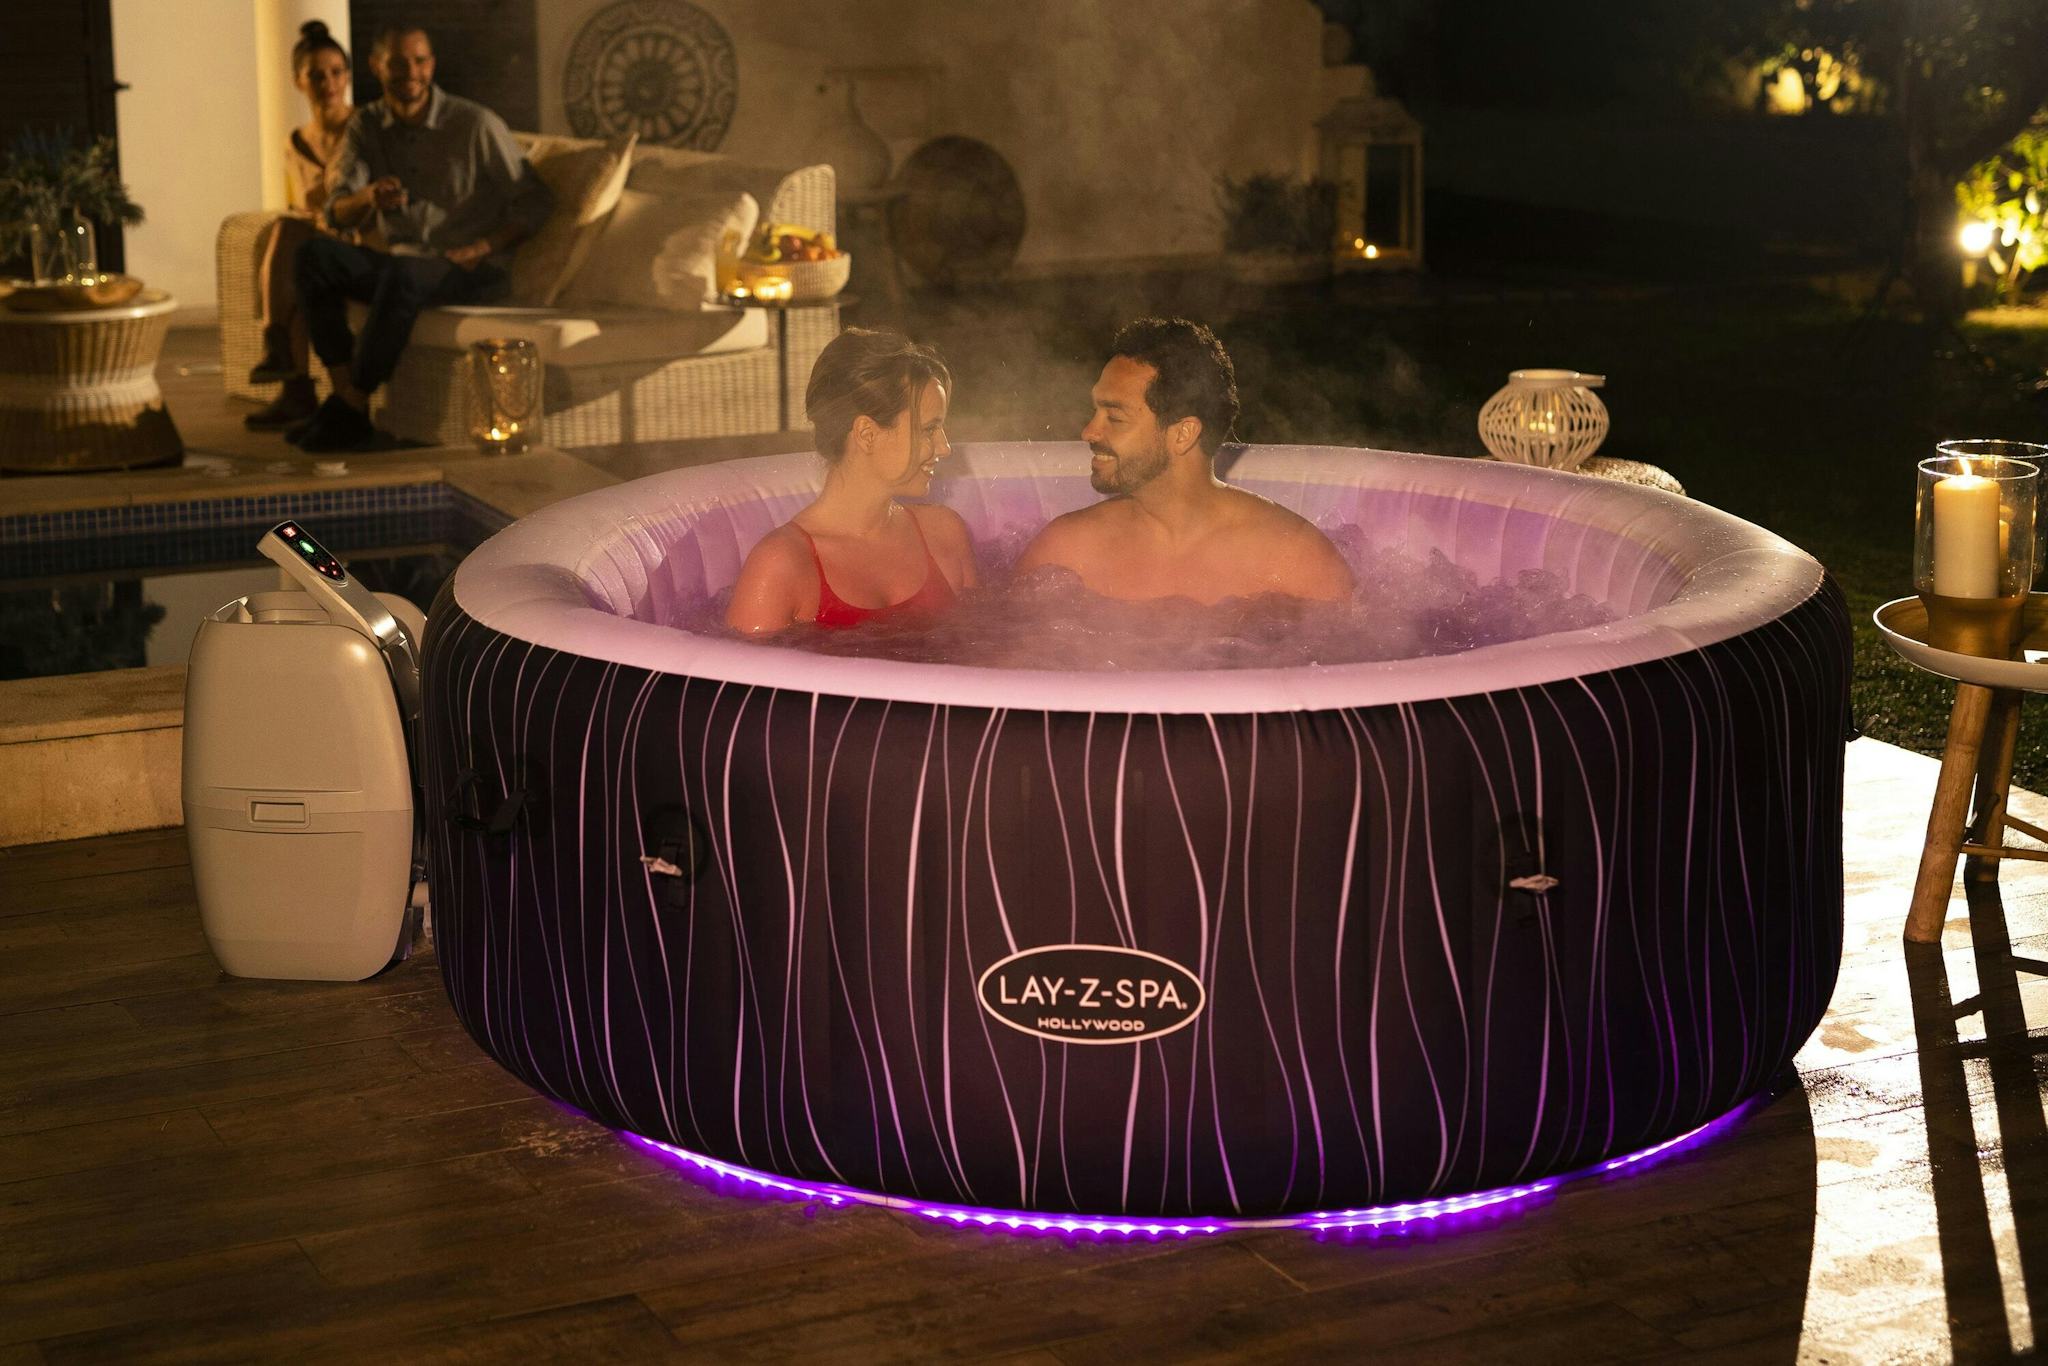 Spas Gonflables Spa gonflable rond Lay-Z-Spa Hollywood Airjet™ 4 - 6 personnes Bestway 15